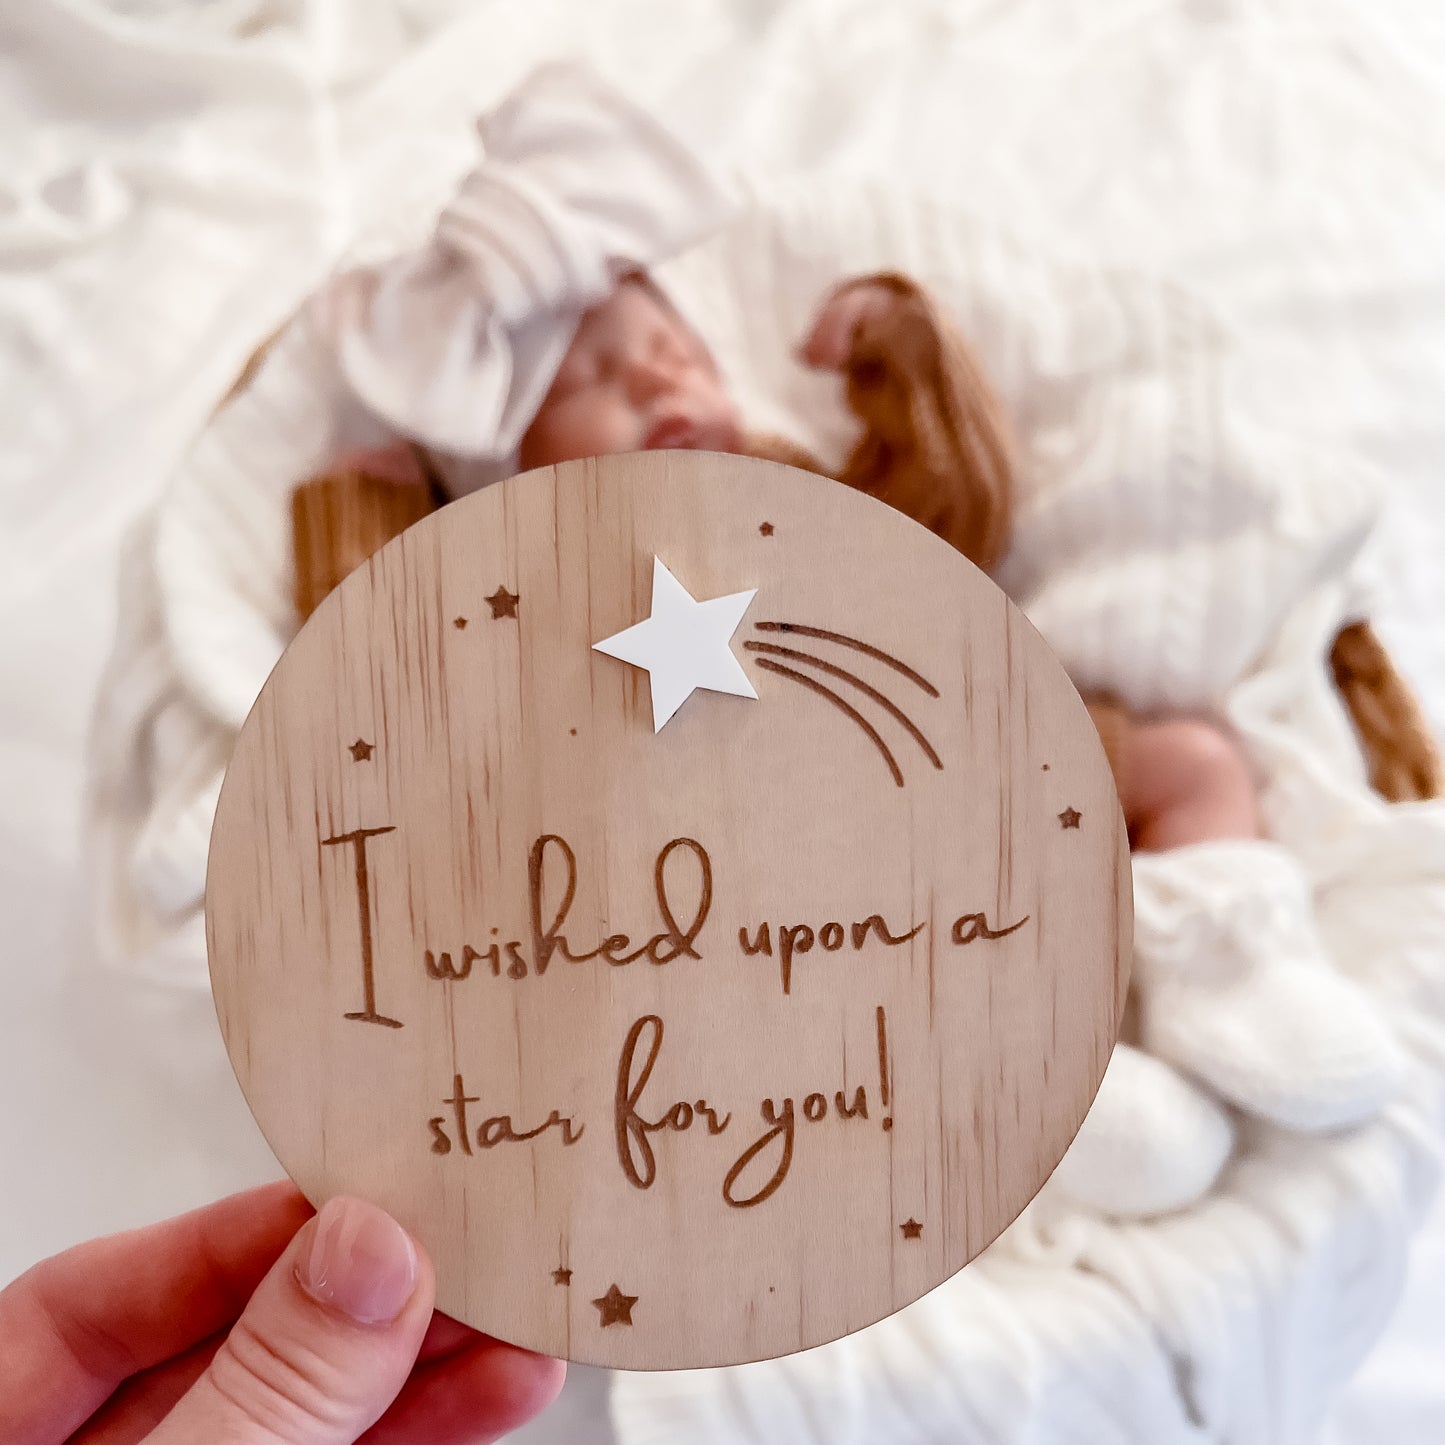 Wooden "Wished Upon a Star" Plaque